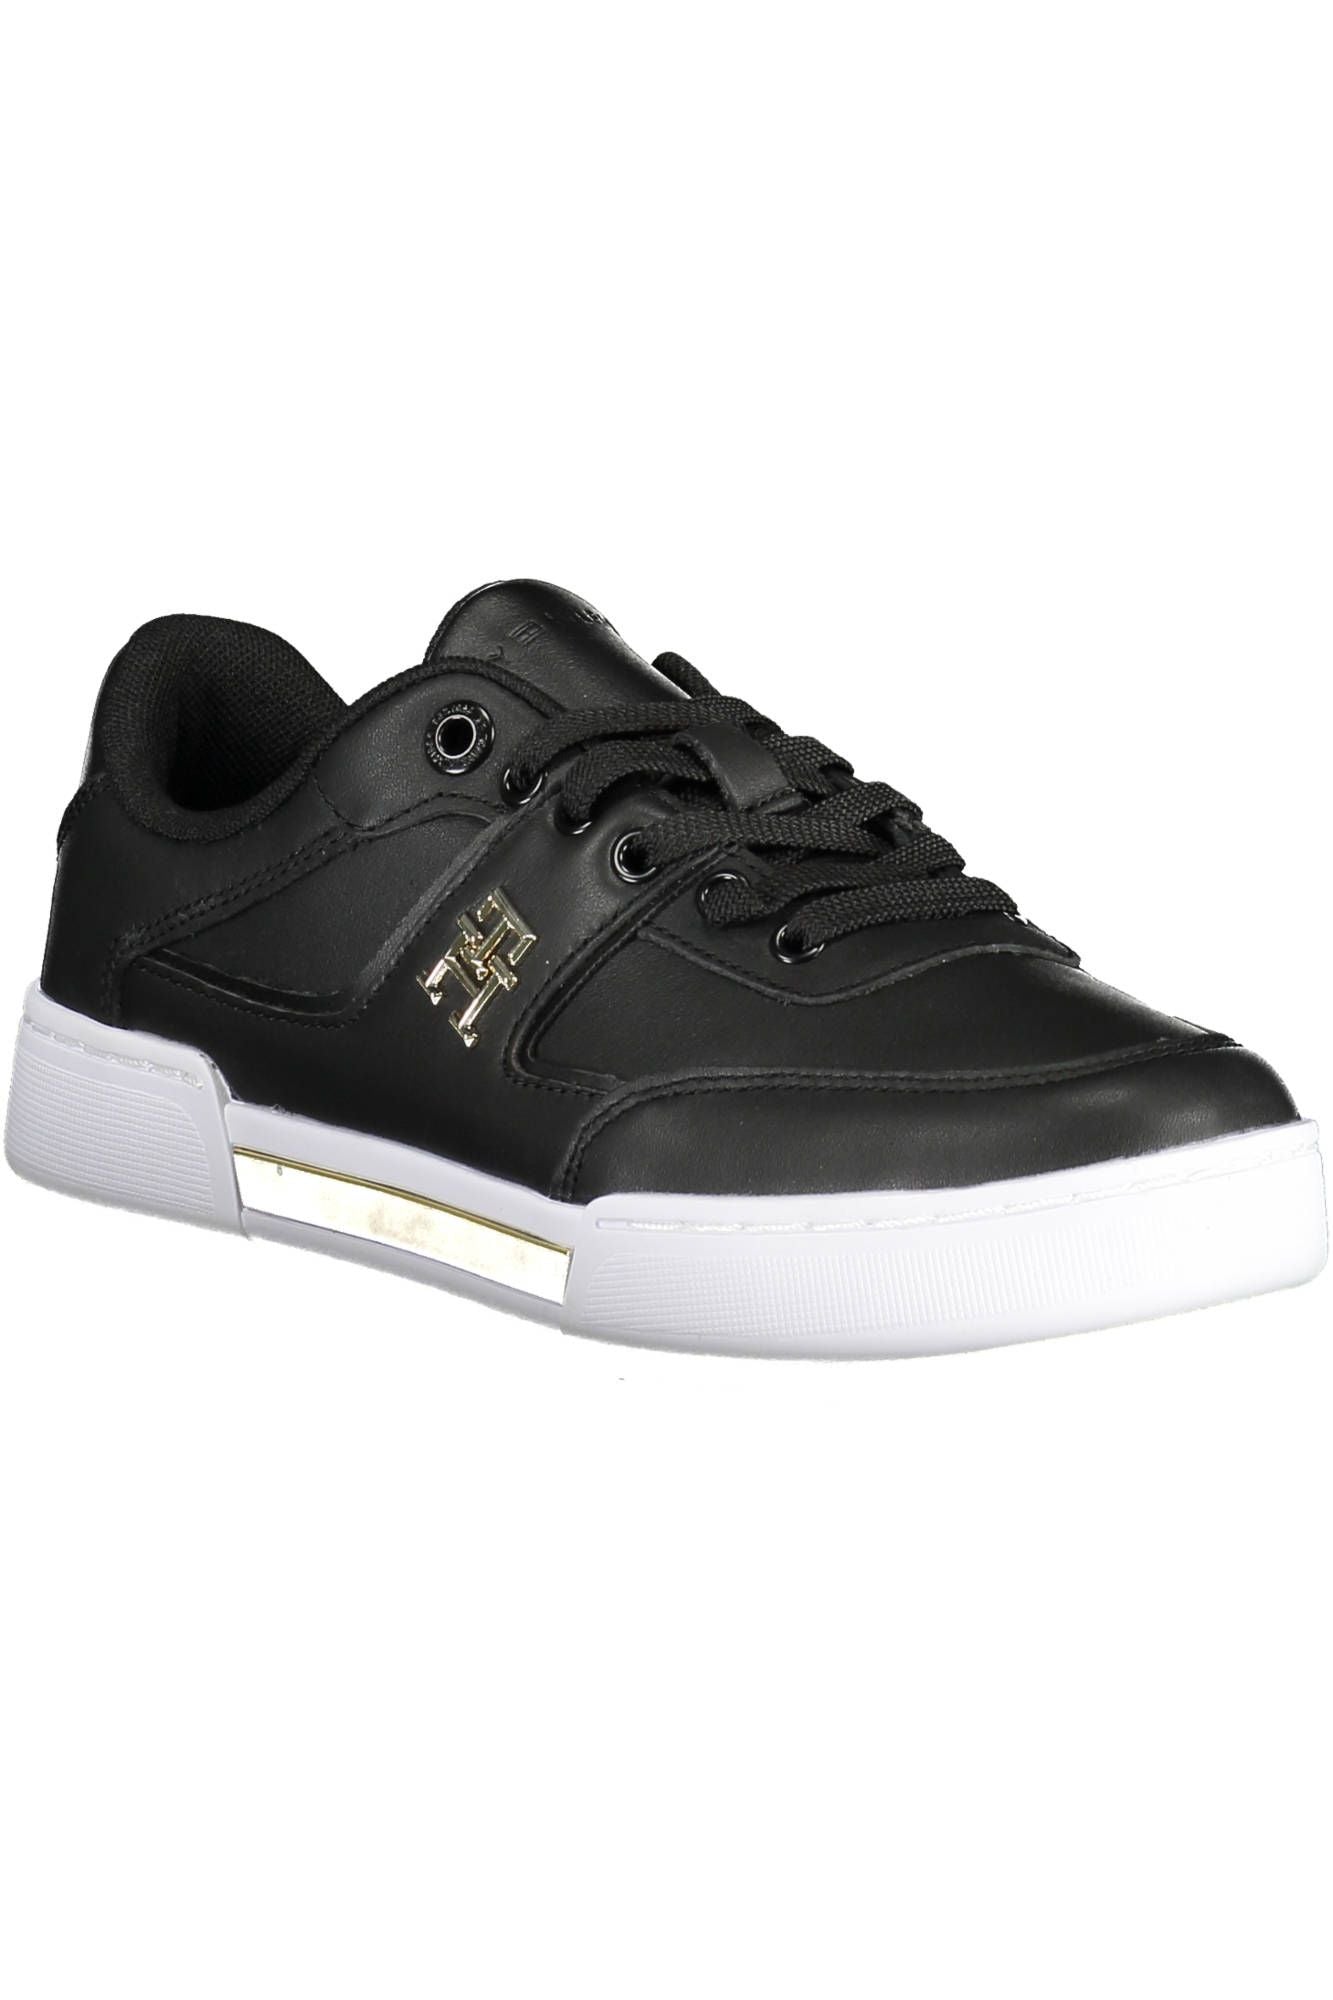 Chic Black Lace-Up Sneakers with Contrasting Accents